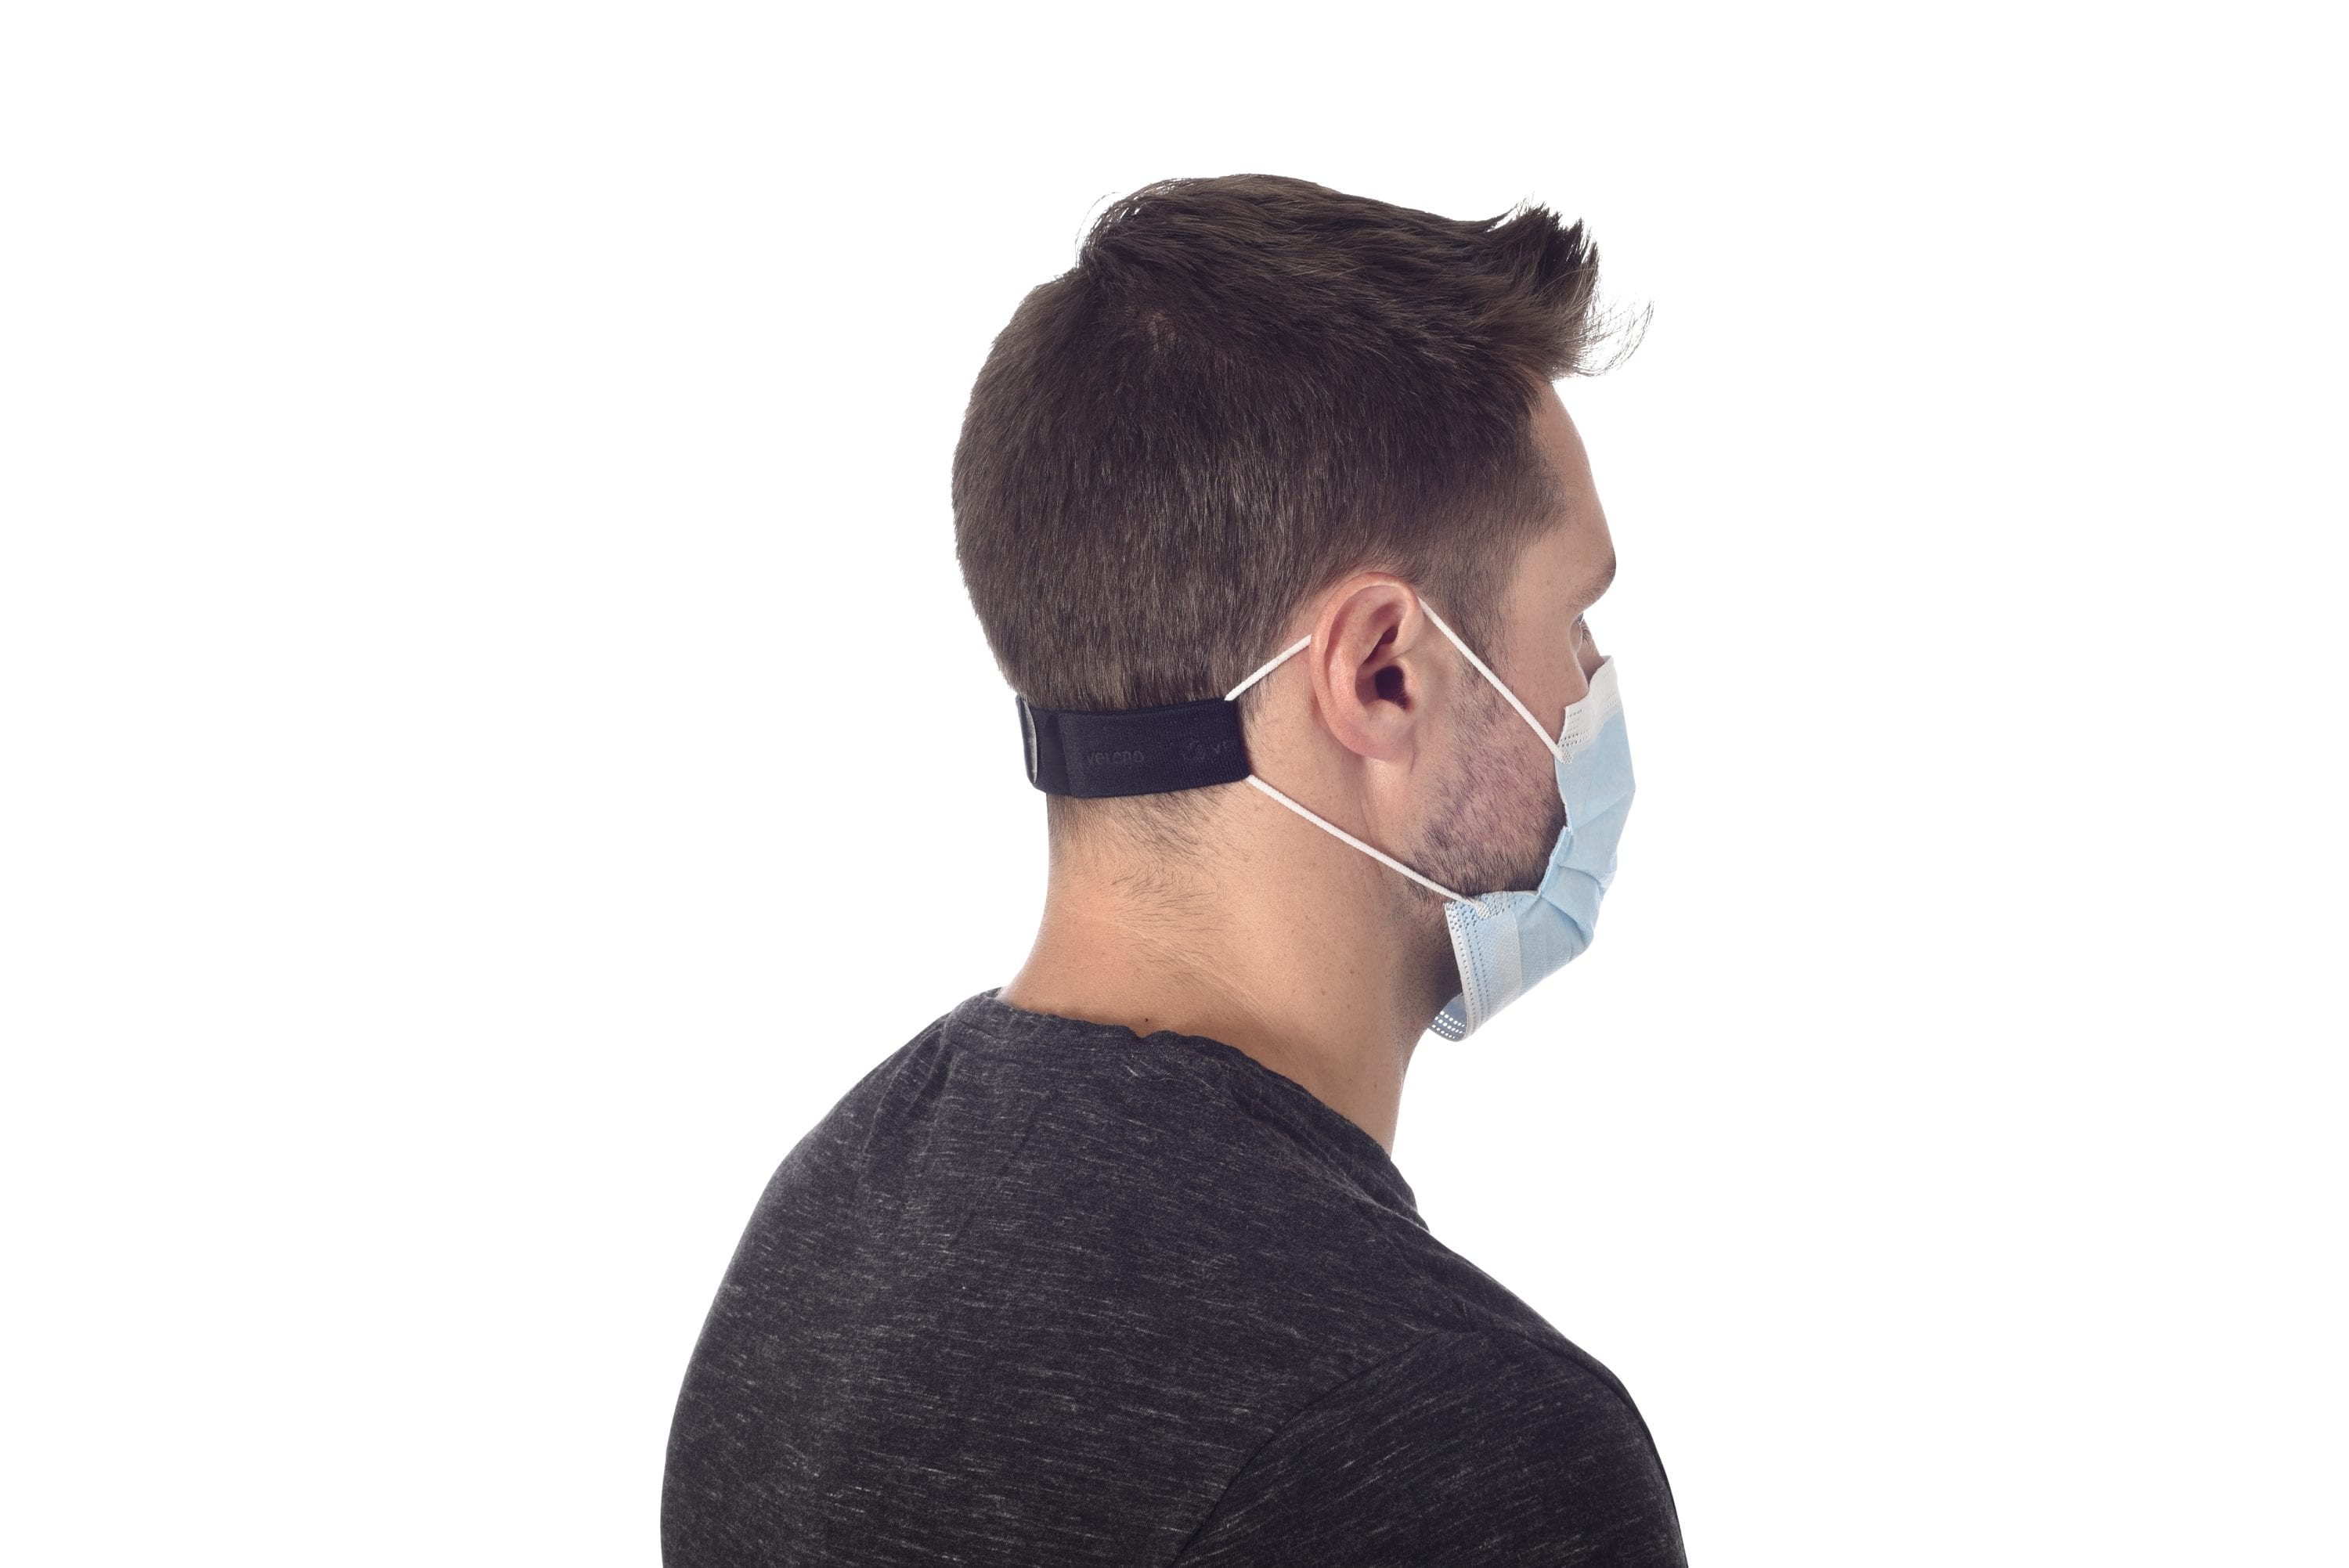 VELCRO Brand Face Mask Extender includes 4 Black Straps, 12” x 1”  Comfortable and Adjustable Ear Savers, VEL-30084-USA